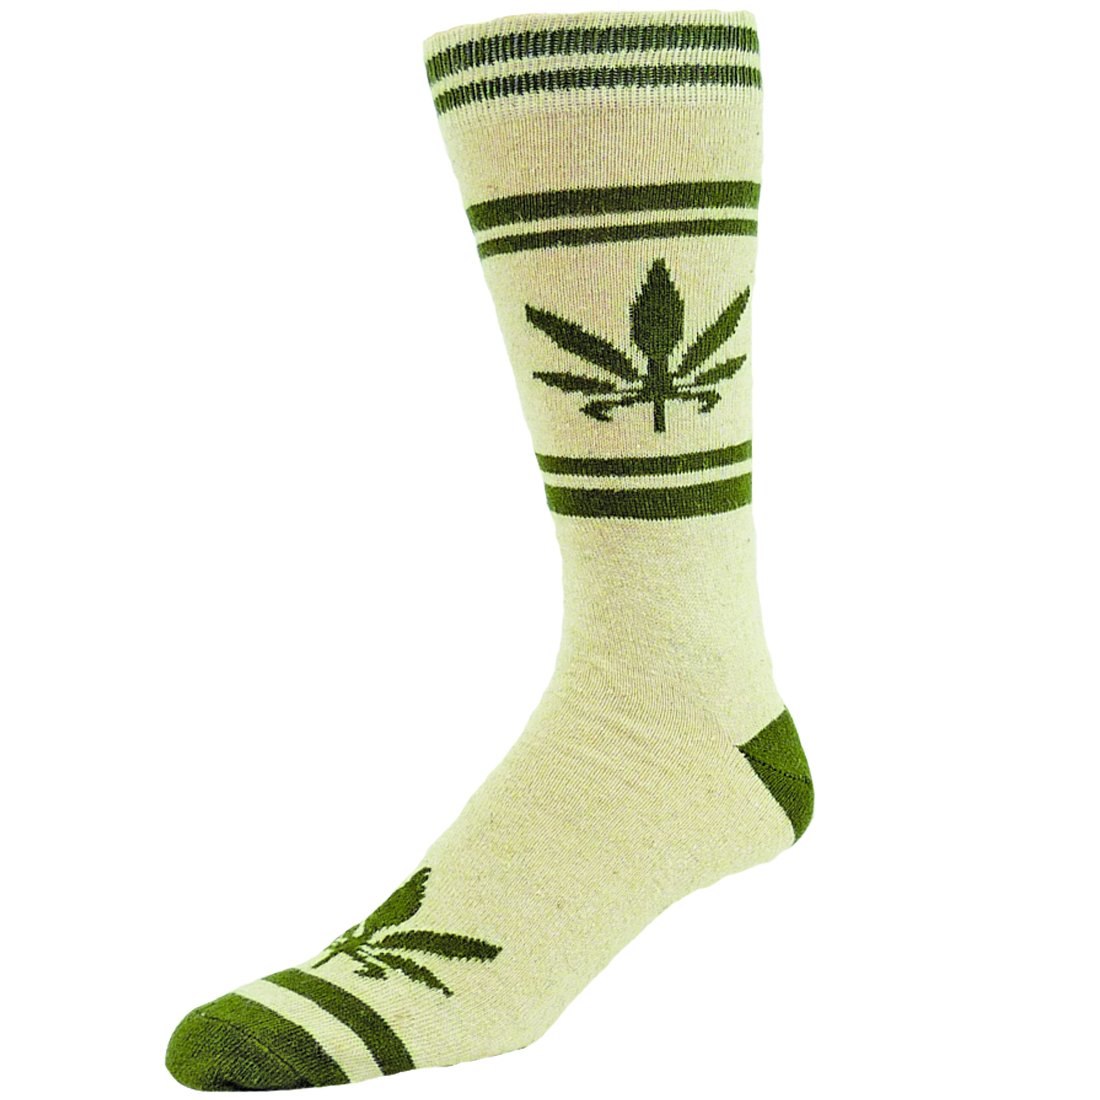 Hemp socks naturally have high antimicrobial properties, great for foot funguses and smelly feet. They are also stronger and more durable, which helps prevent holes. 